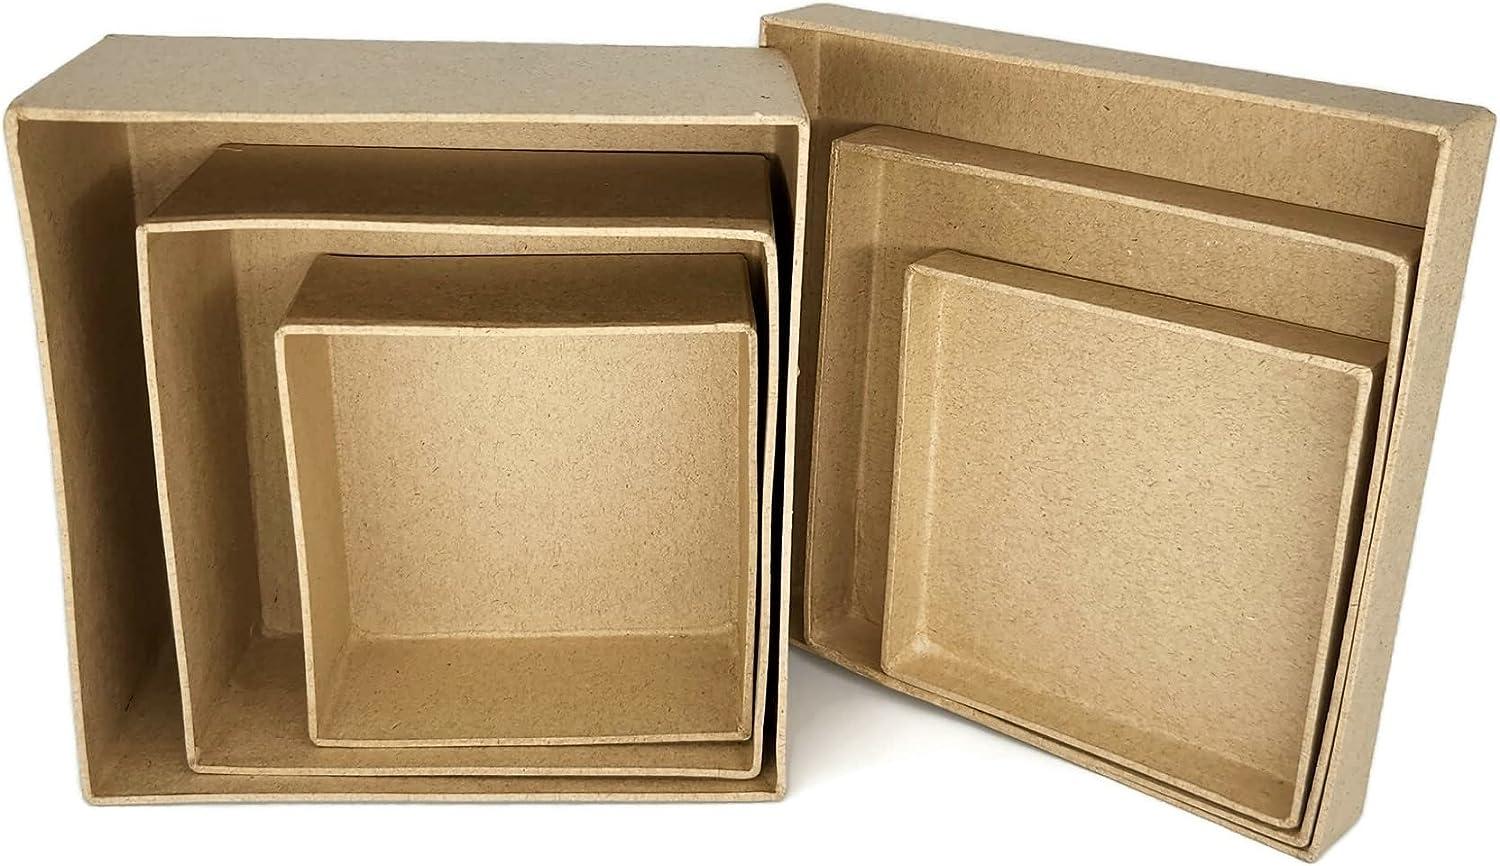 AllStellar Square Paper Mache Nesting Boxes Small Set of 3 Paper Mache  Boxes with lids for Crafting Gifts Storing Jewelry Treasure Accessories  Cosmetics Ornament and more 3 pcs Square Box